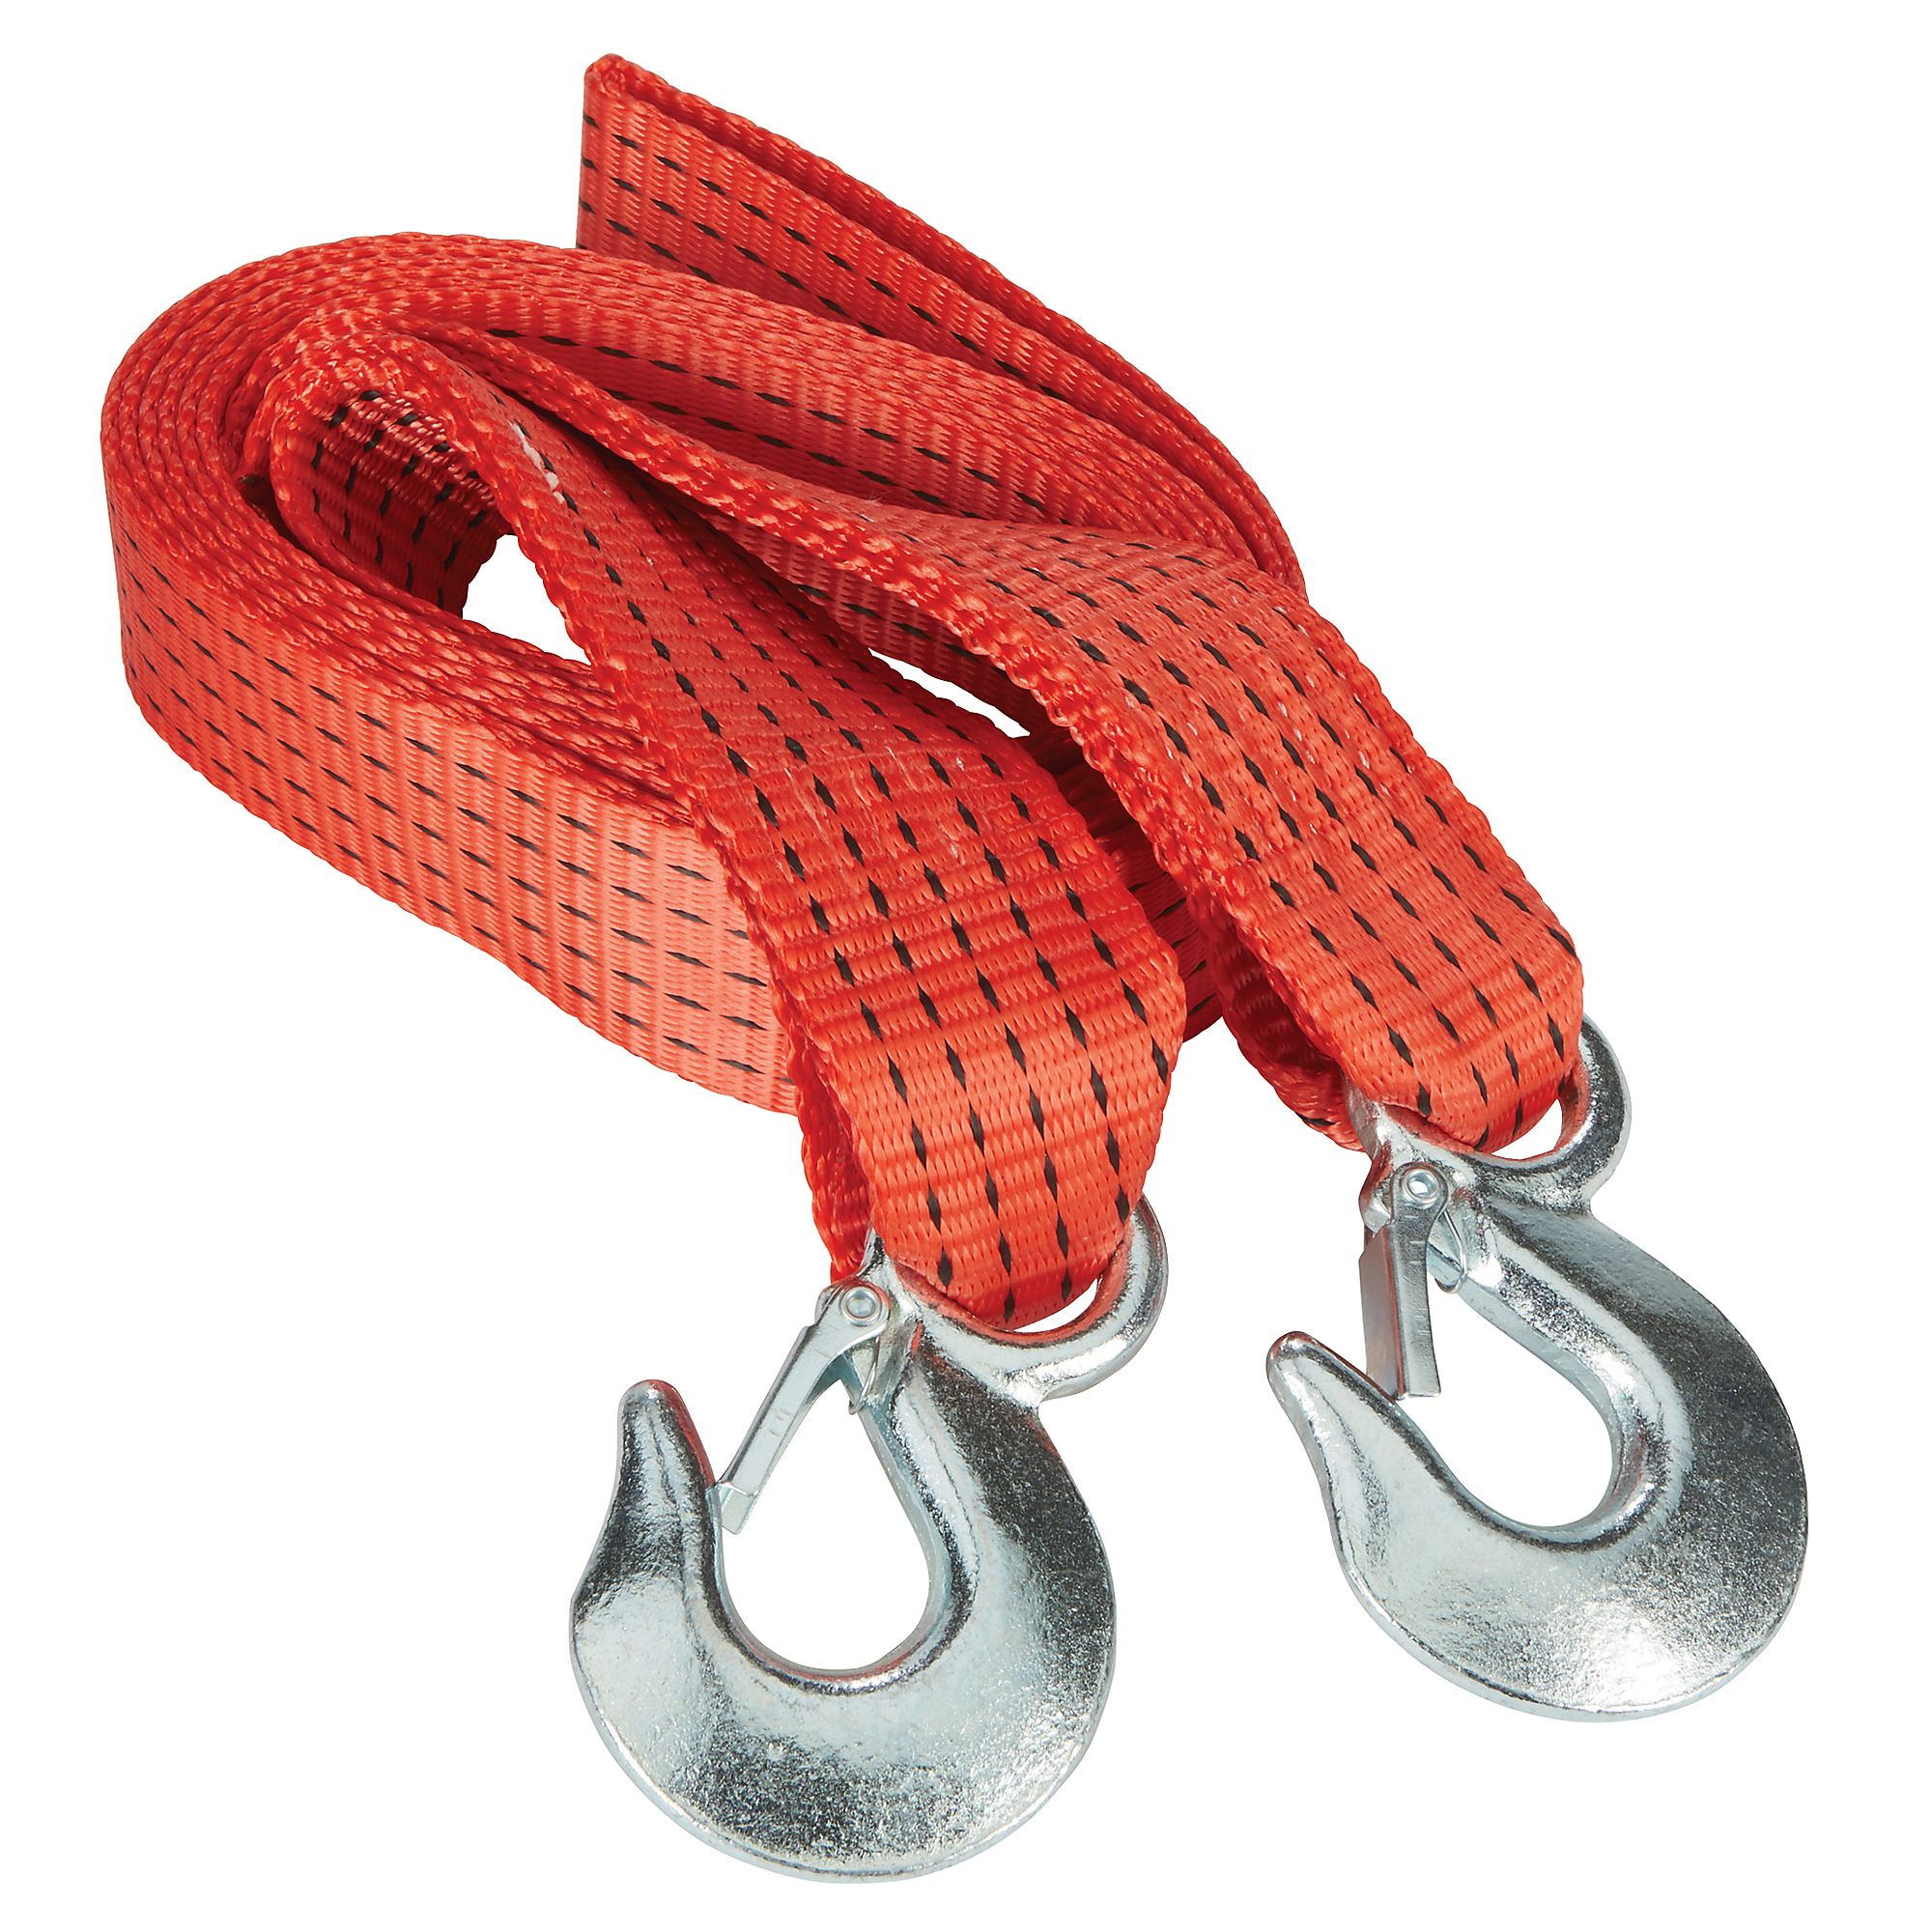 Ironton 13ft. Vehicle Recovery Strap, 11,000-Lb. Working Load, Model GS-77006